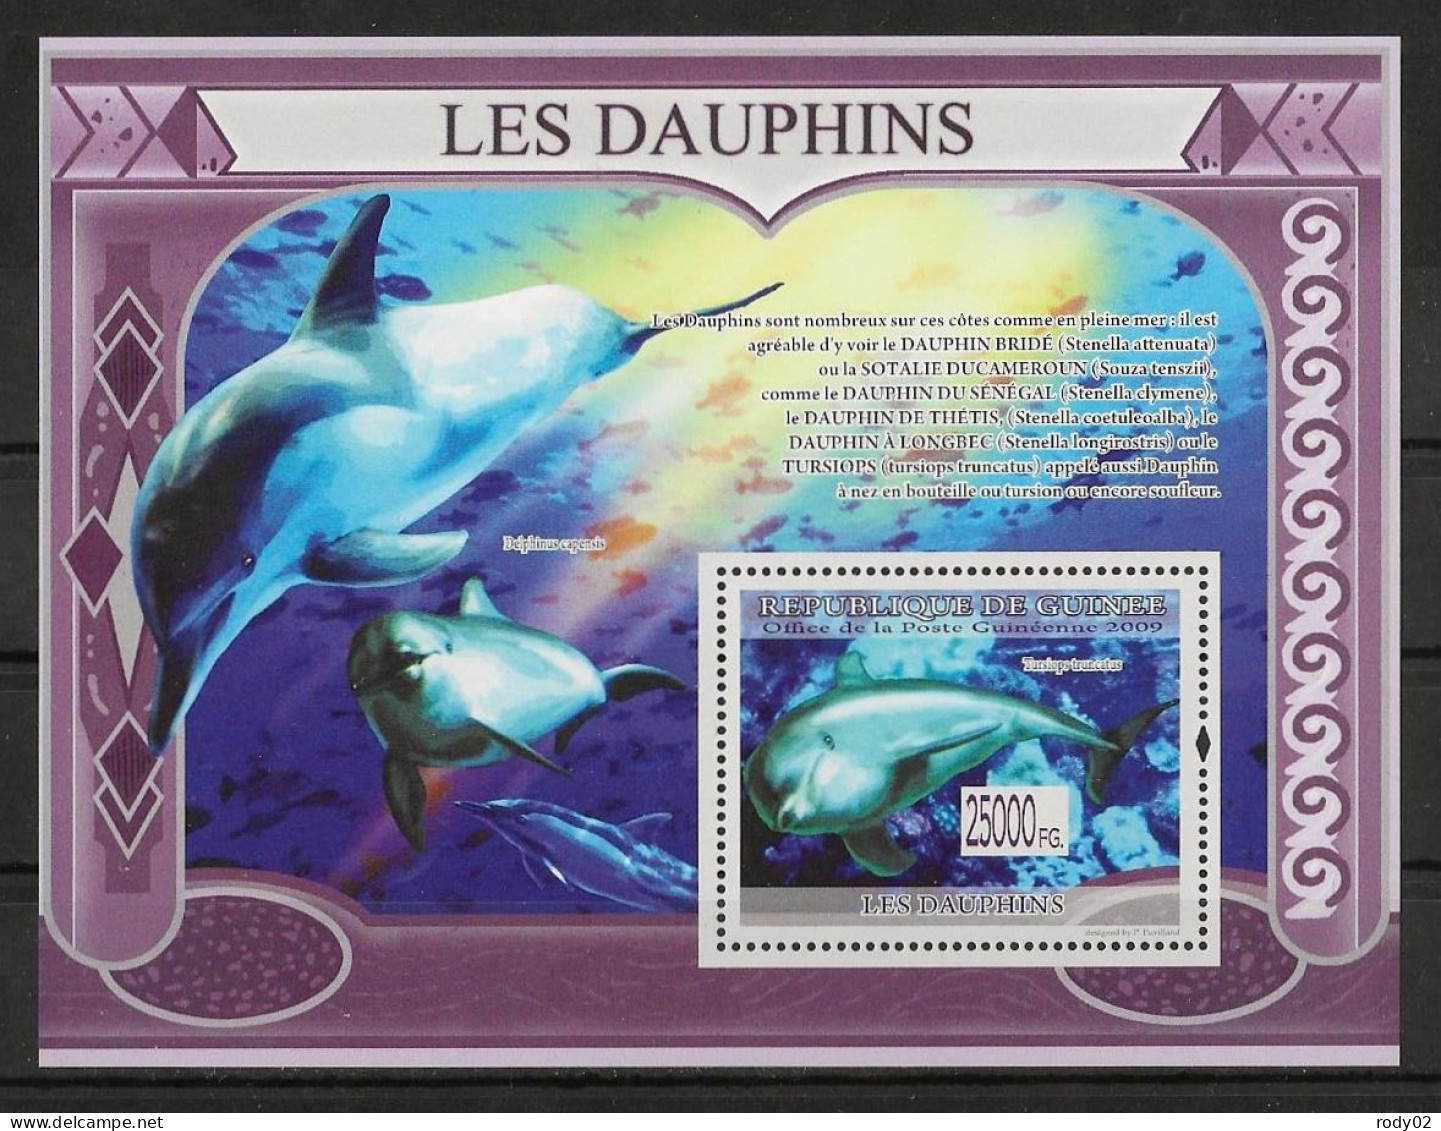 GUINEE - DAUPHINS - N° 4008 A 4013 ET BF 968 - NEUF** MNH - Delfine